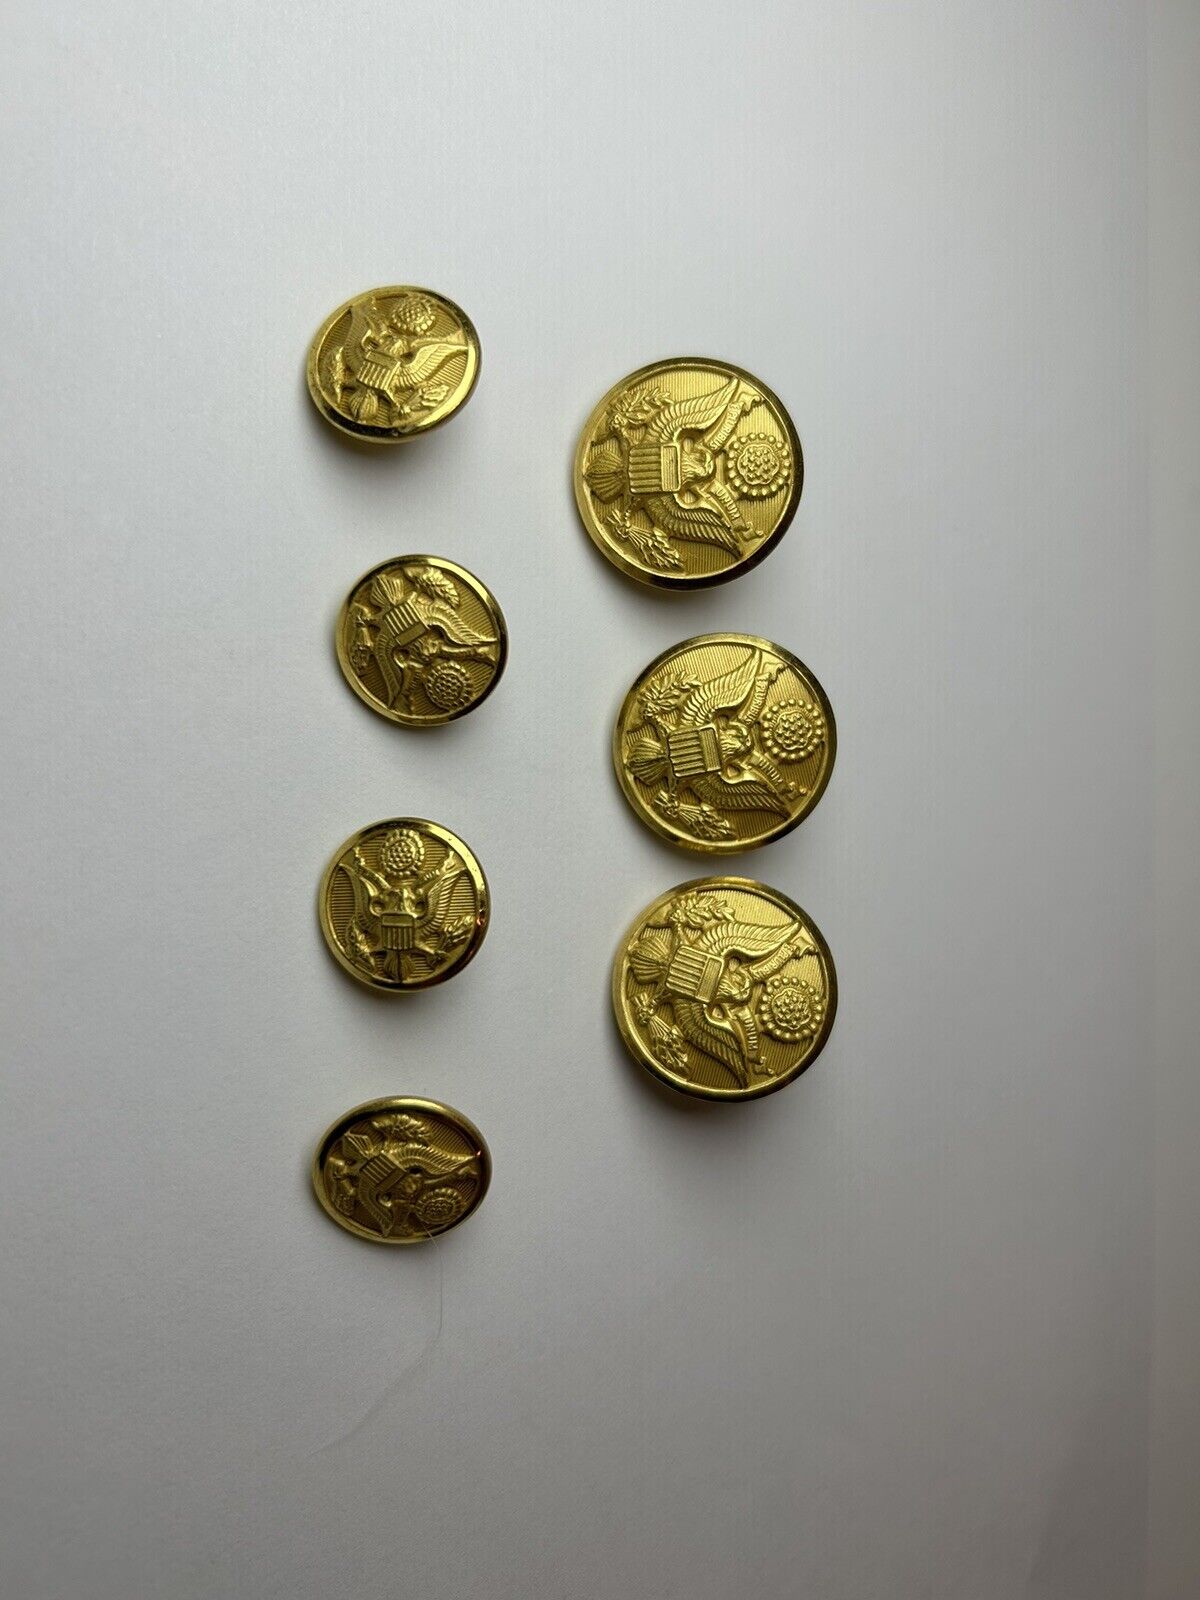 Military  Brass Buttons Waterbury Cos Conn-Lot Of 7 - 3 Lg And 4 Small